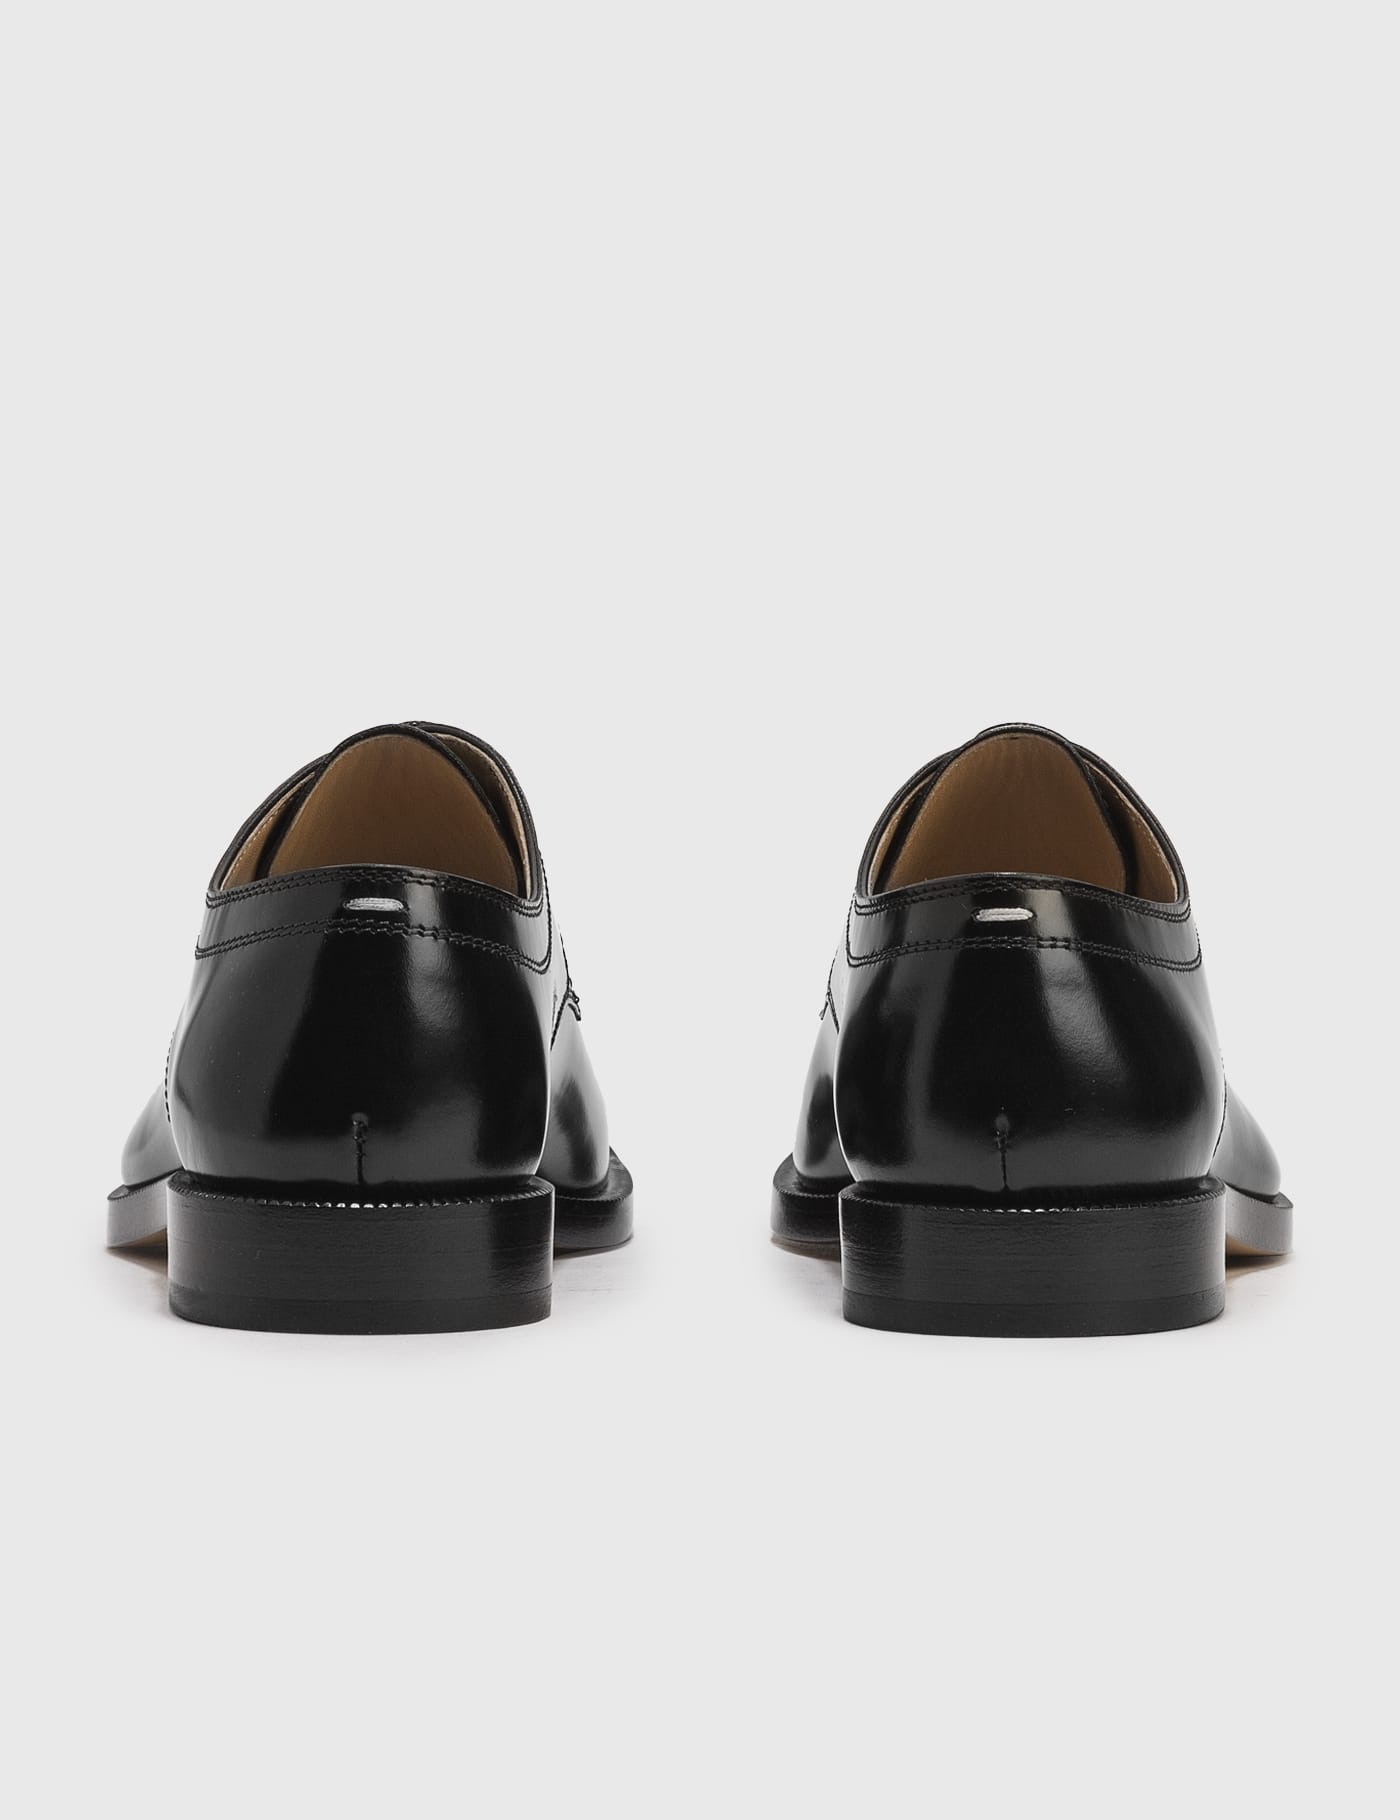 Maison Margiela - Tabi Lace Up Shoes | HBX - Globally Curated Fashion and  Lifestyle by Hypebeast